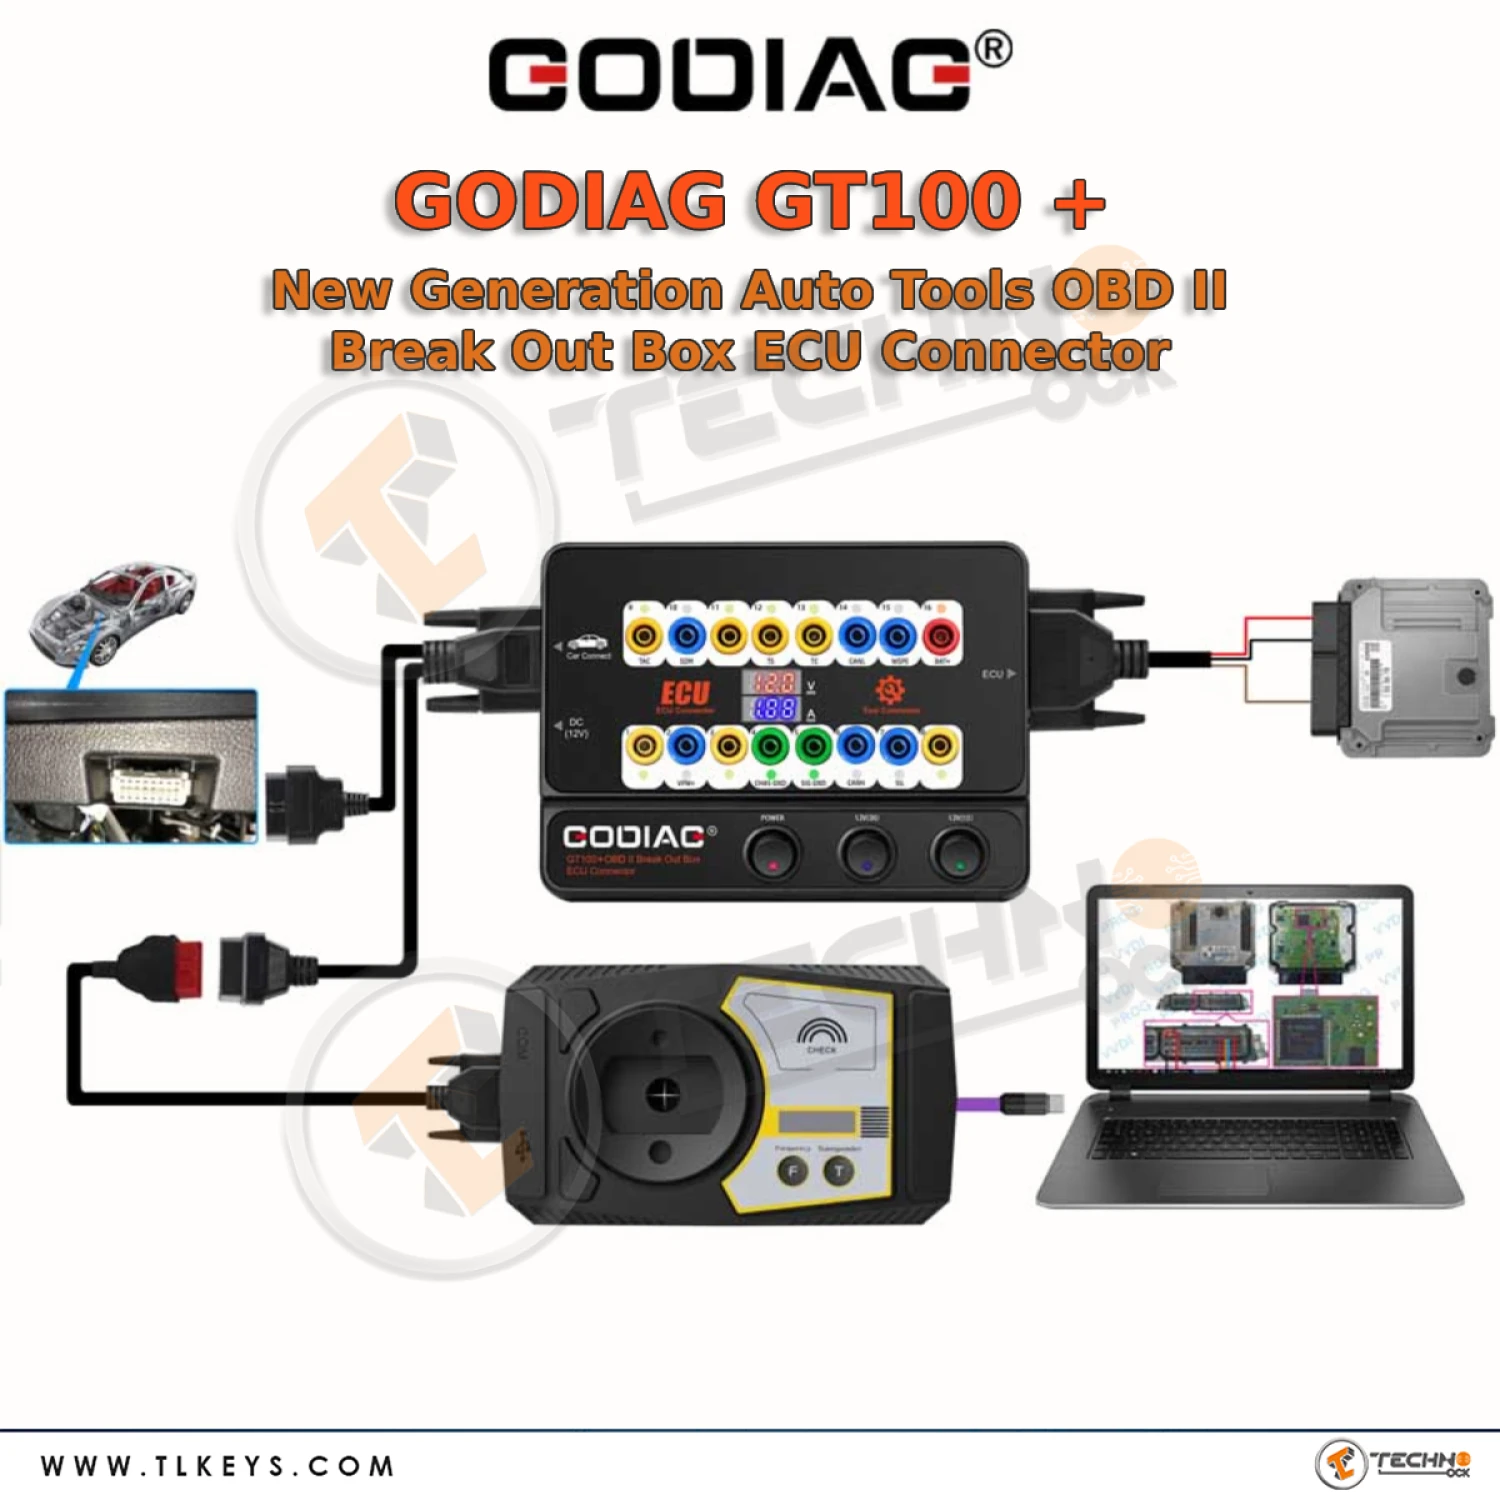 GODIAG GT100 Voltage and Current Value Display function